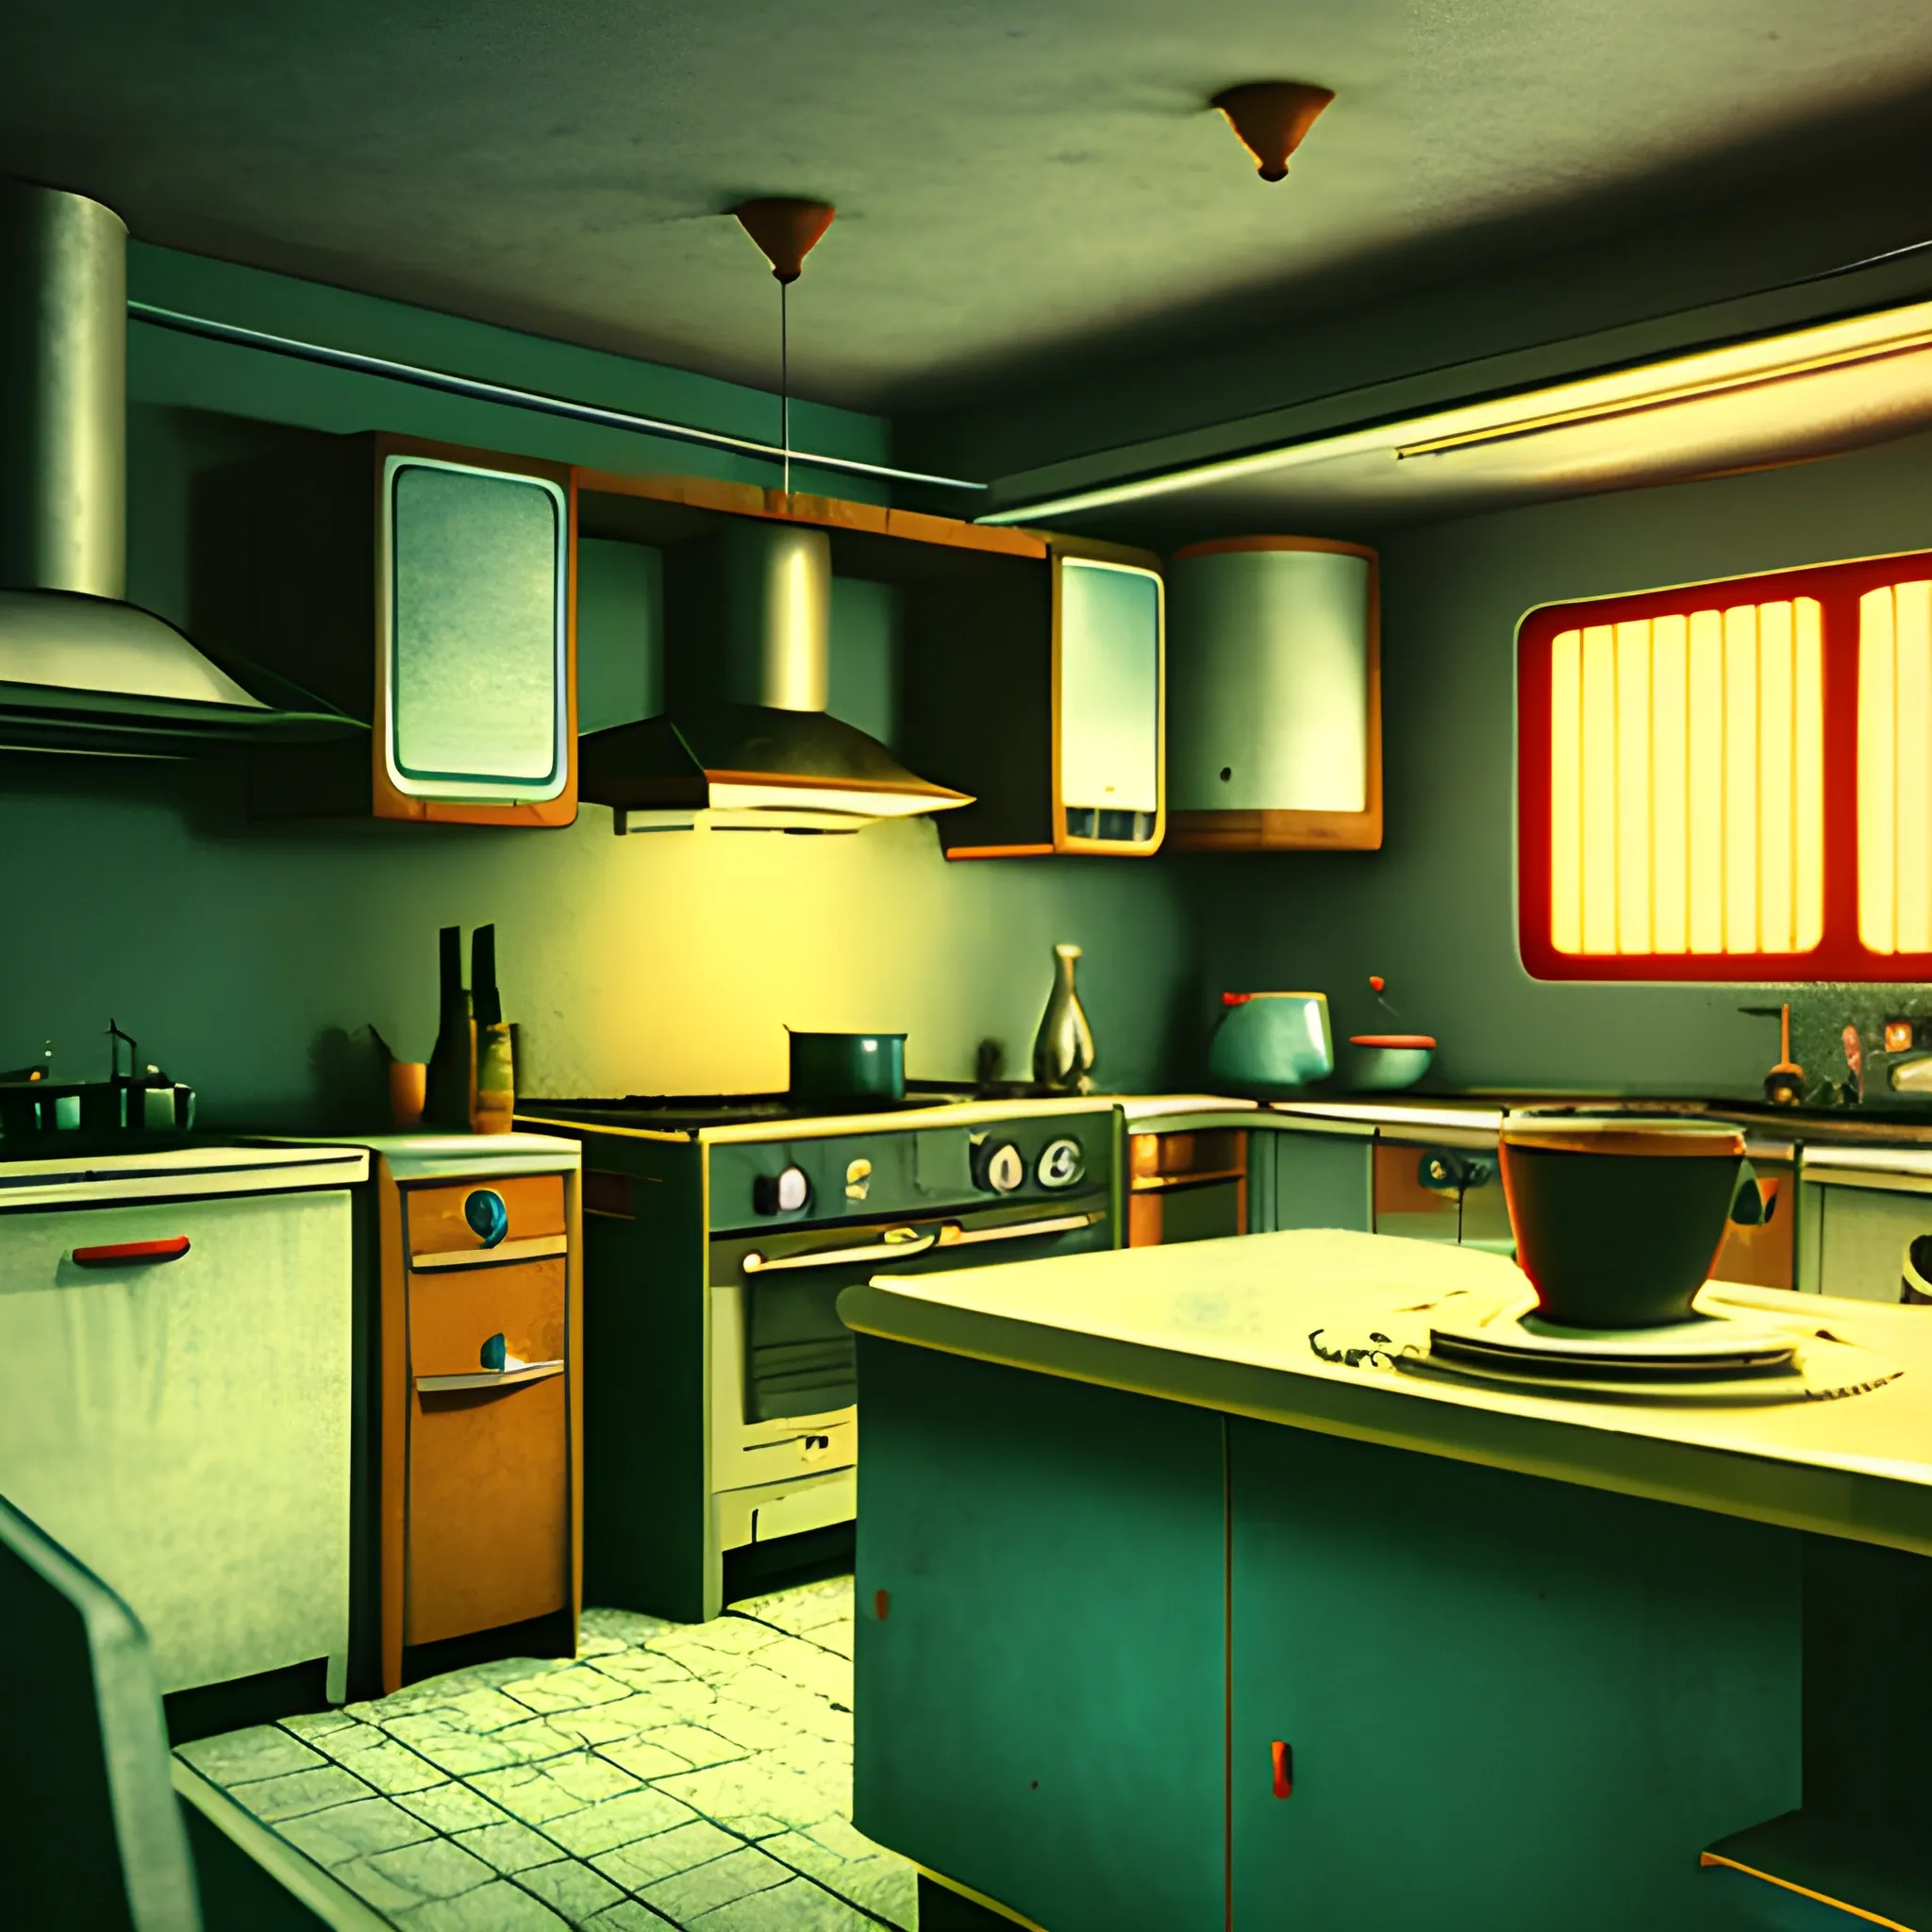 Kitchen, fancy dinner, retro futuristic, highly detailed, realistic, sovietism, 4k 